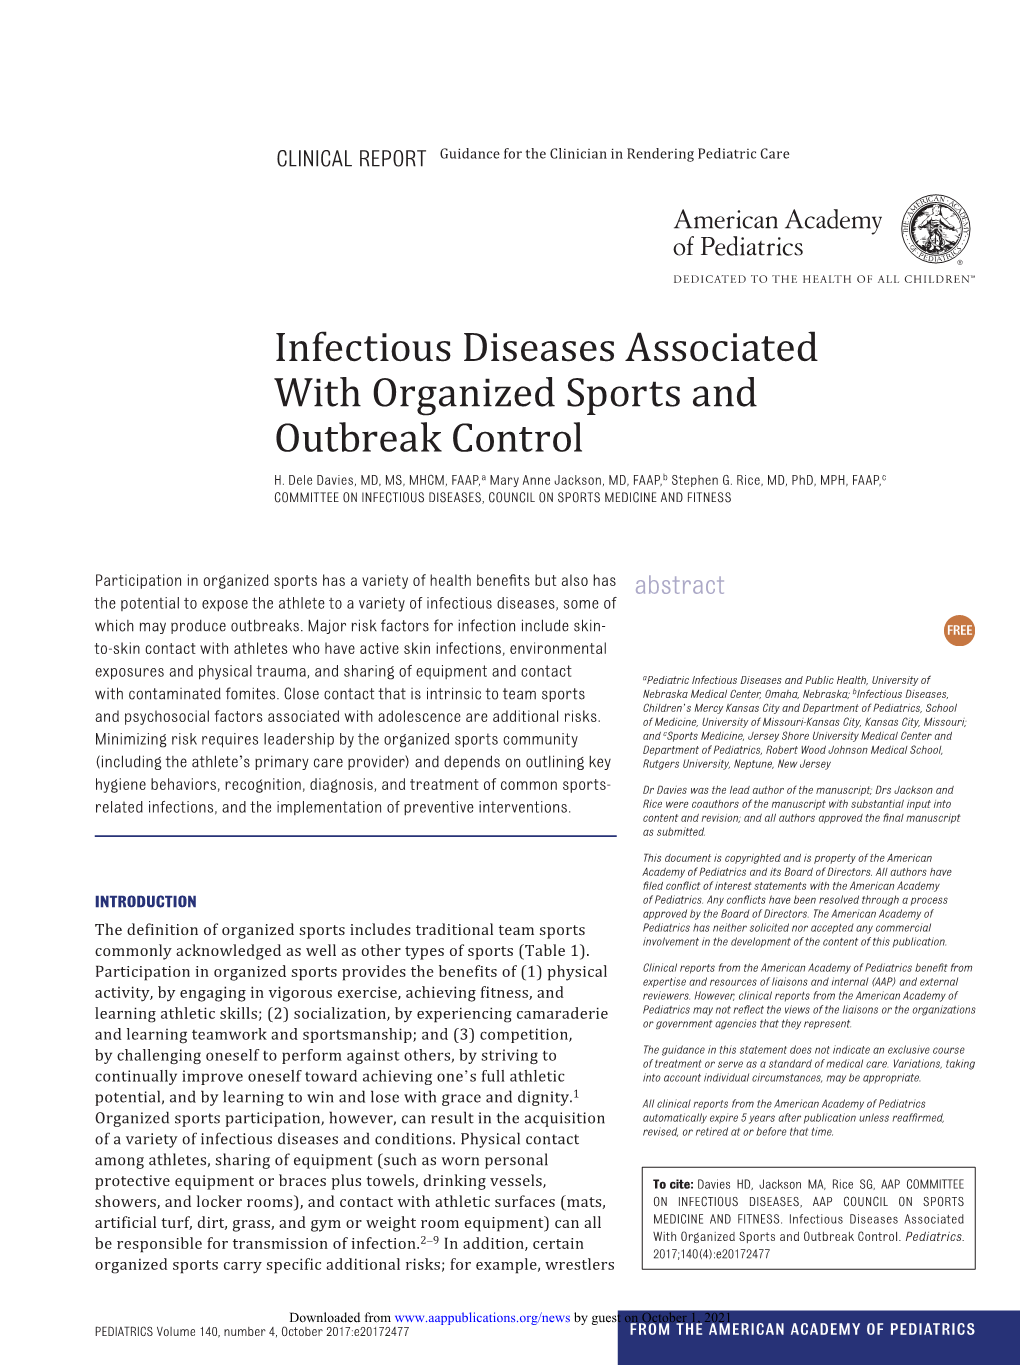 Infectious Diseases Associated with Organized Sports and Outbreak Control